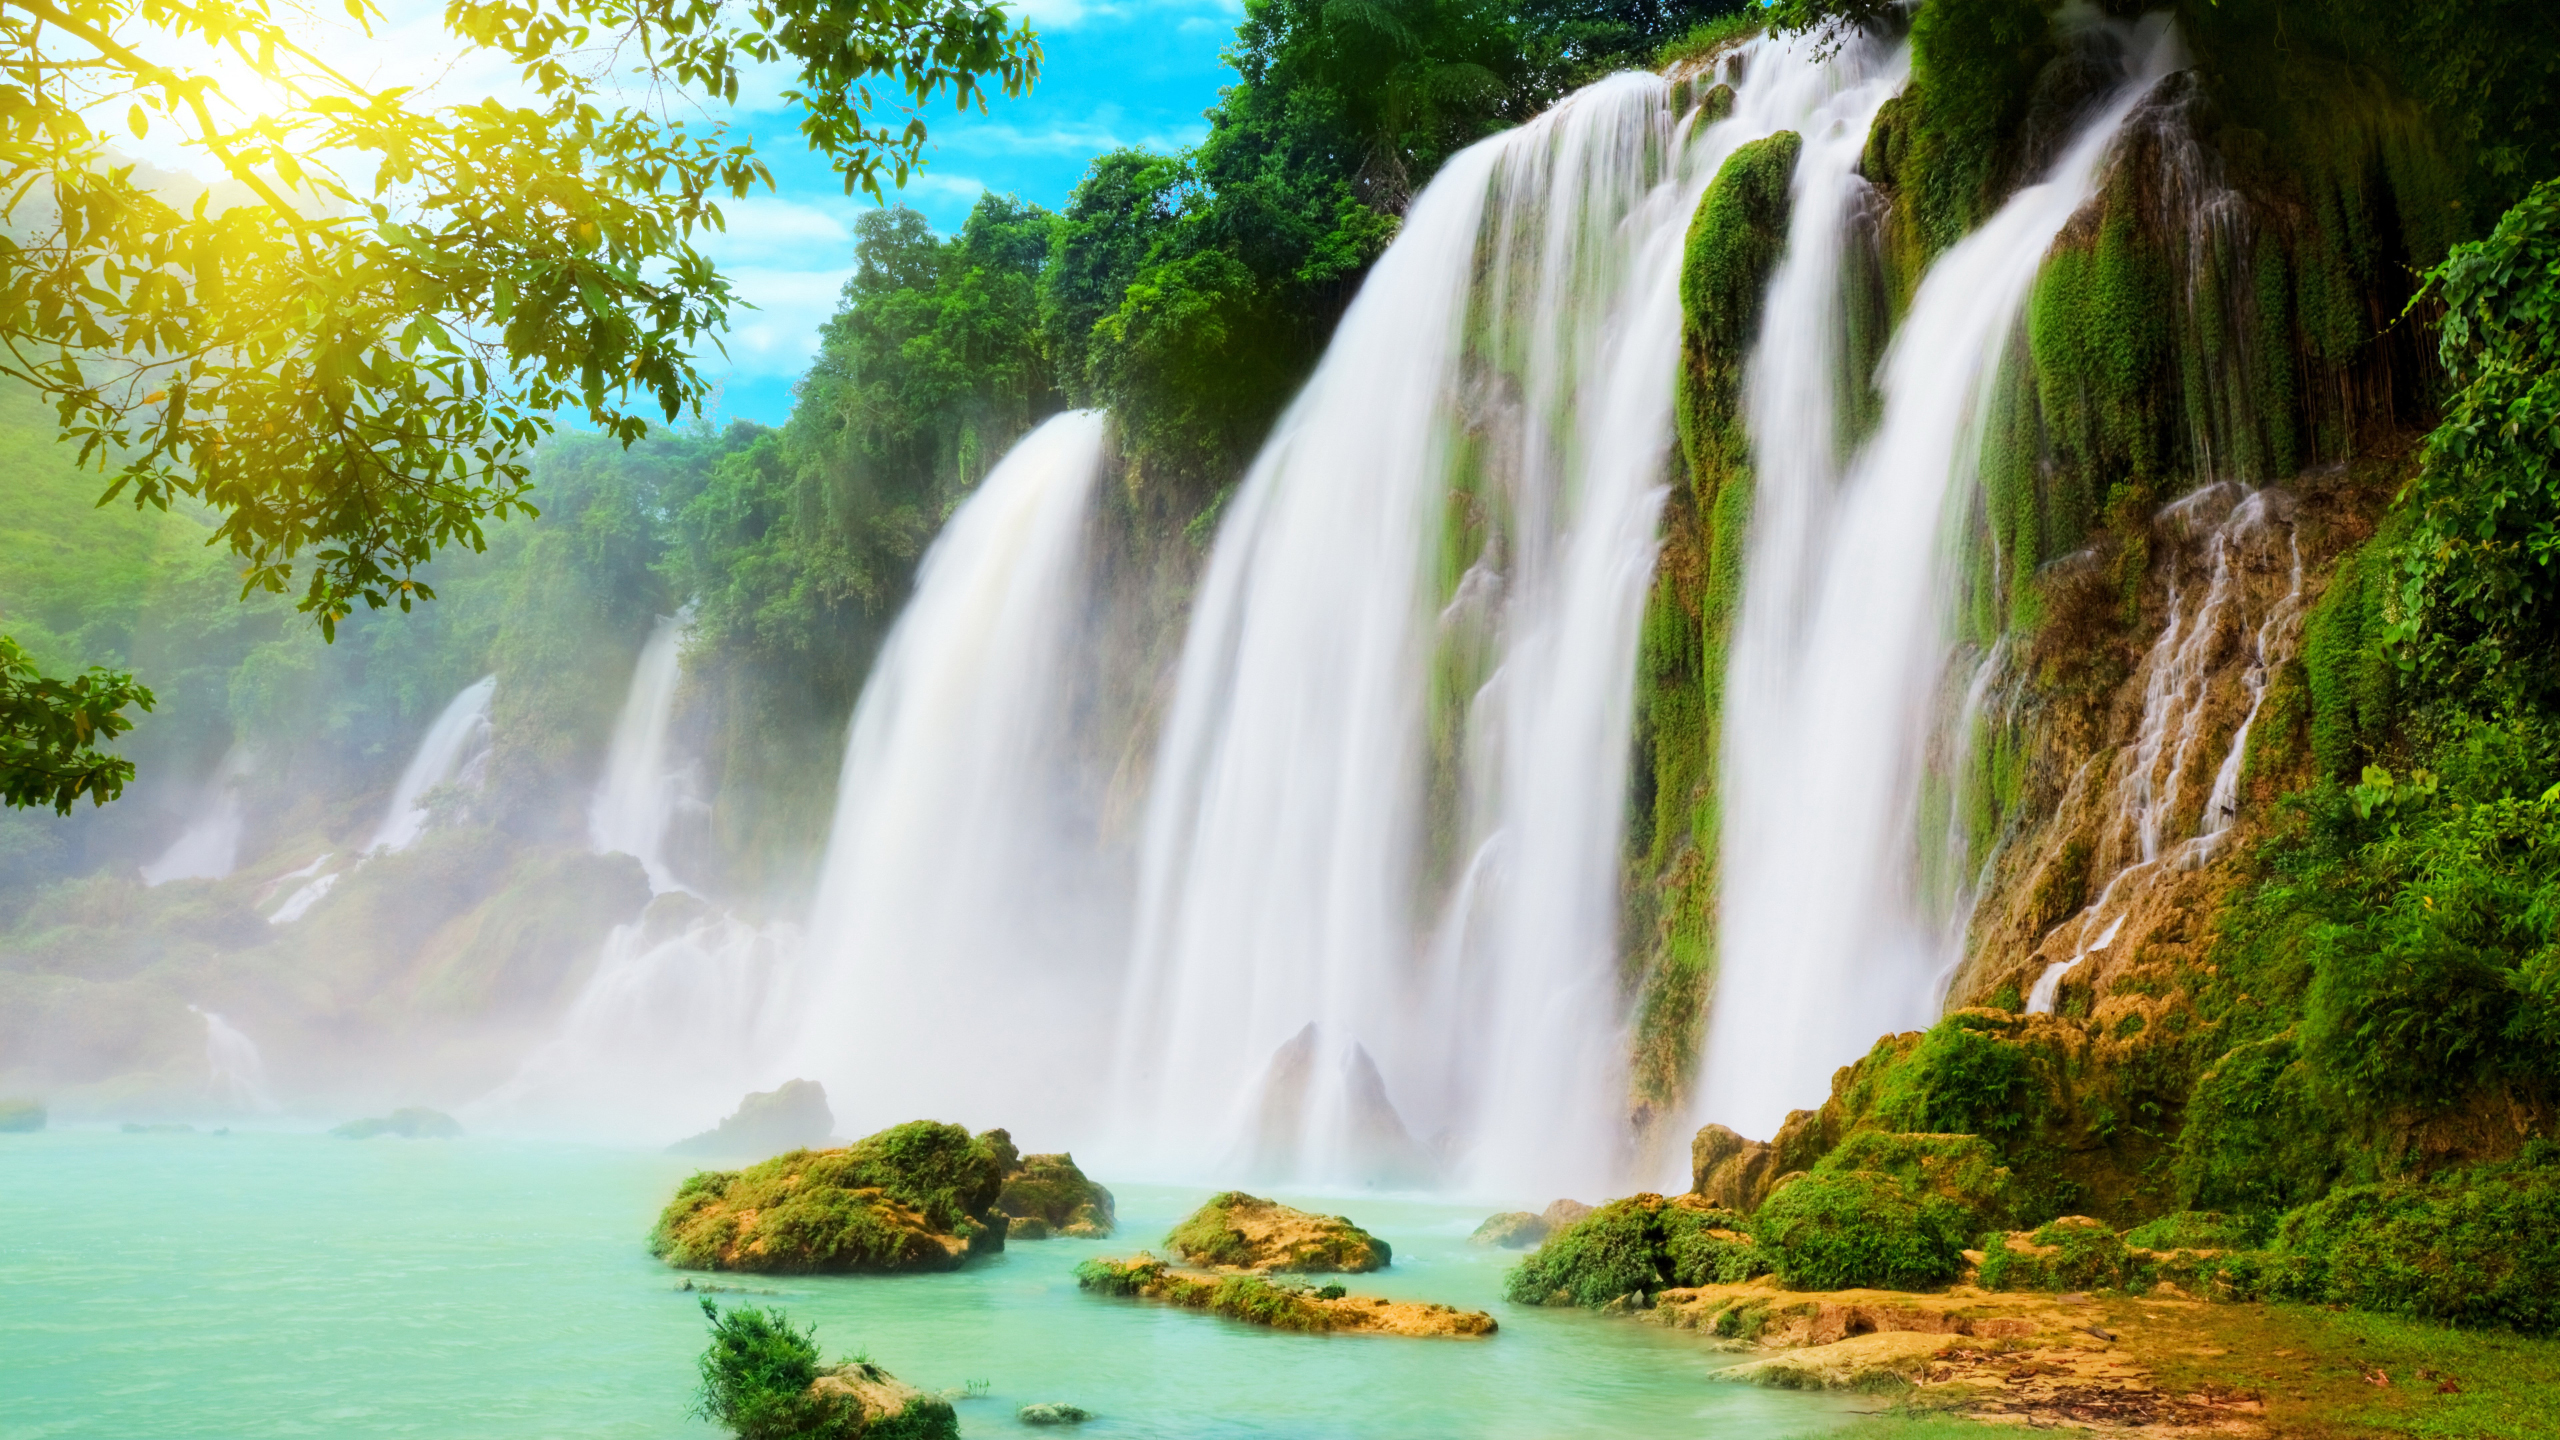 Beautiful Scenery Waterfalls From Green Algae Covered Rock Mountains HD Scenery